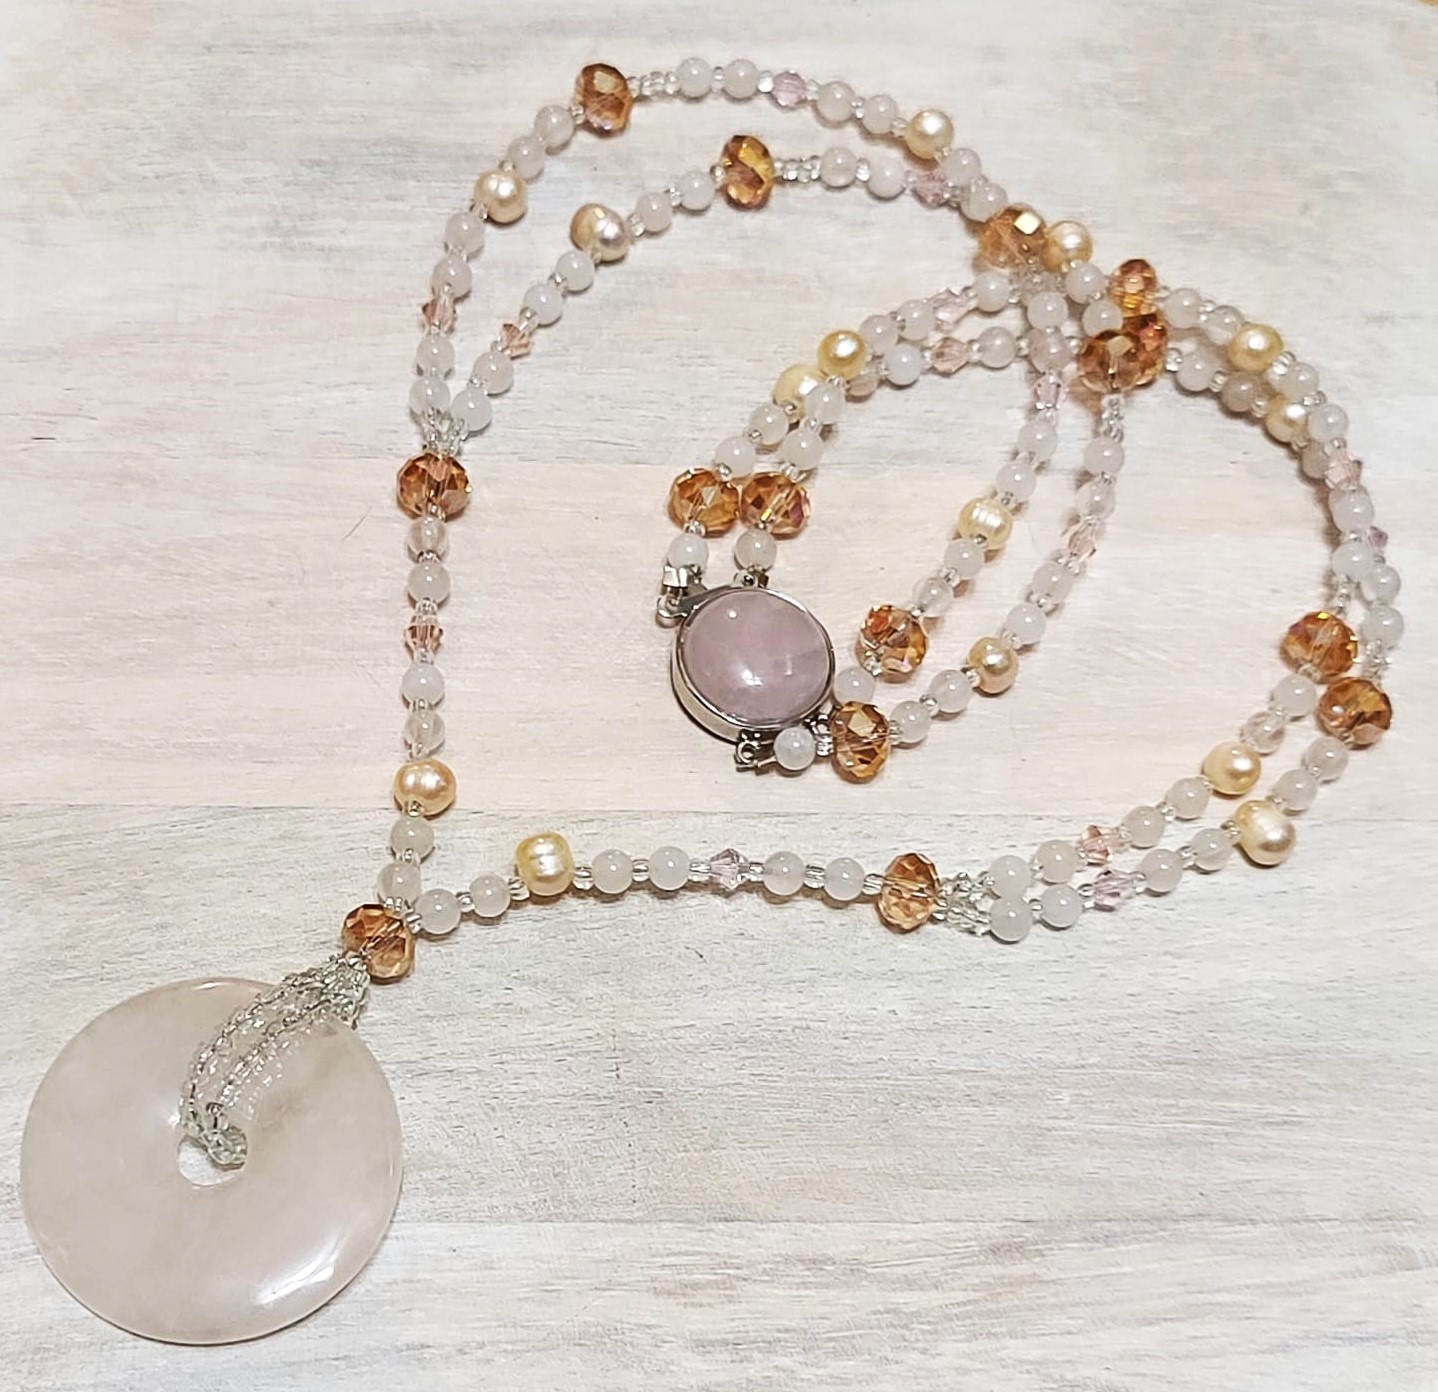 Pink quartz necklace, lariat style, freshwater pearls & crystals